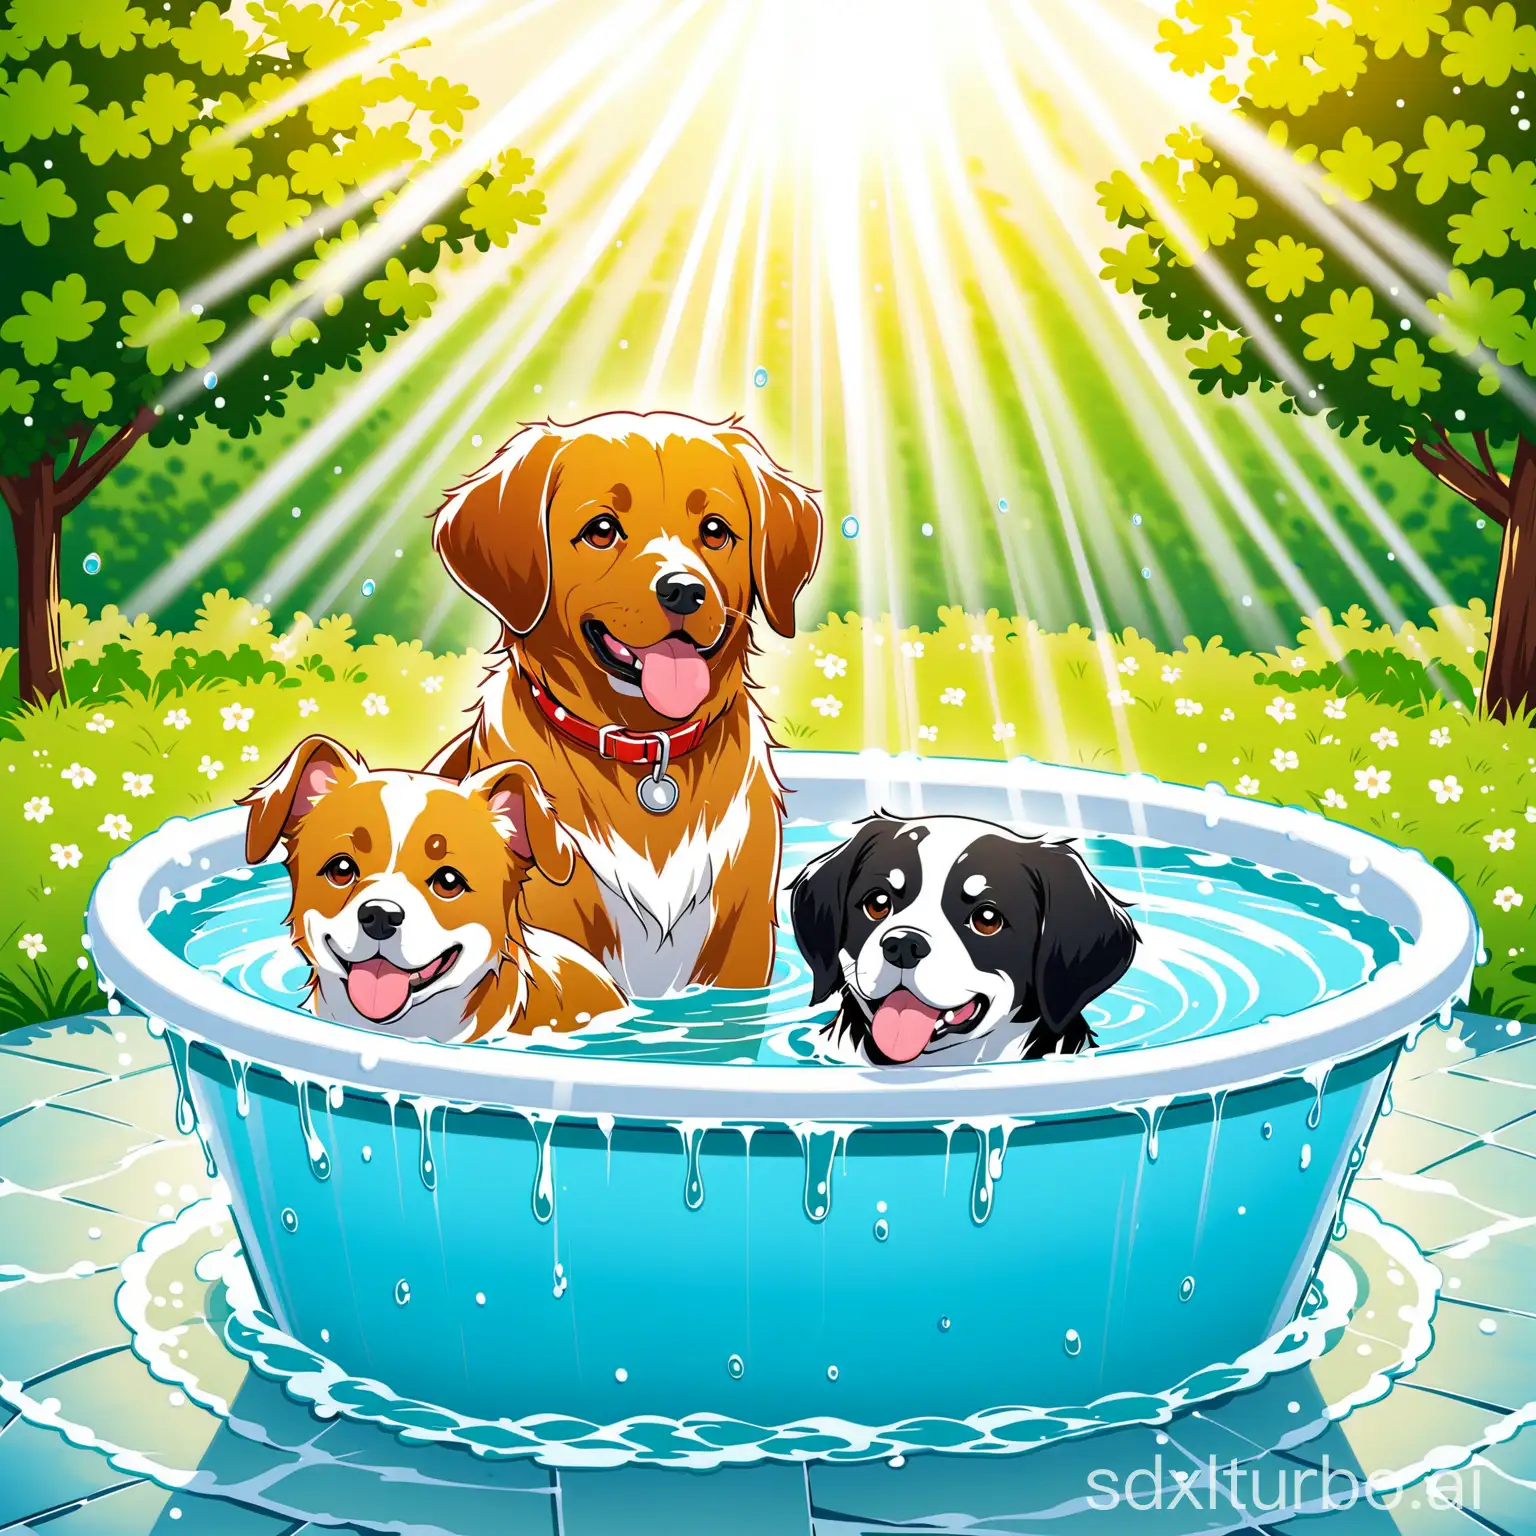 Adorable-Dogs-Enjoying-a-Relaxing-Bath-Together